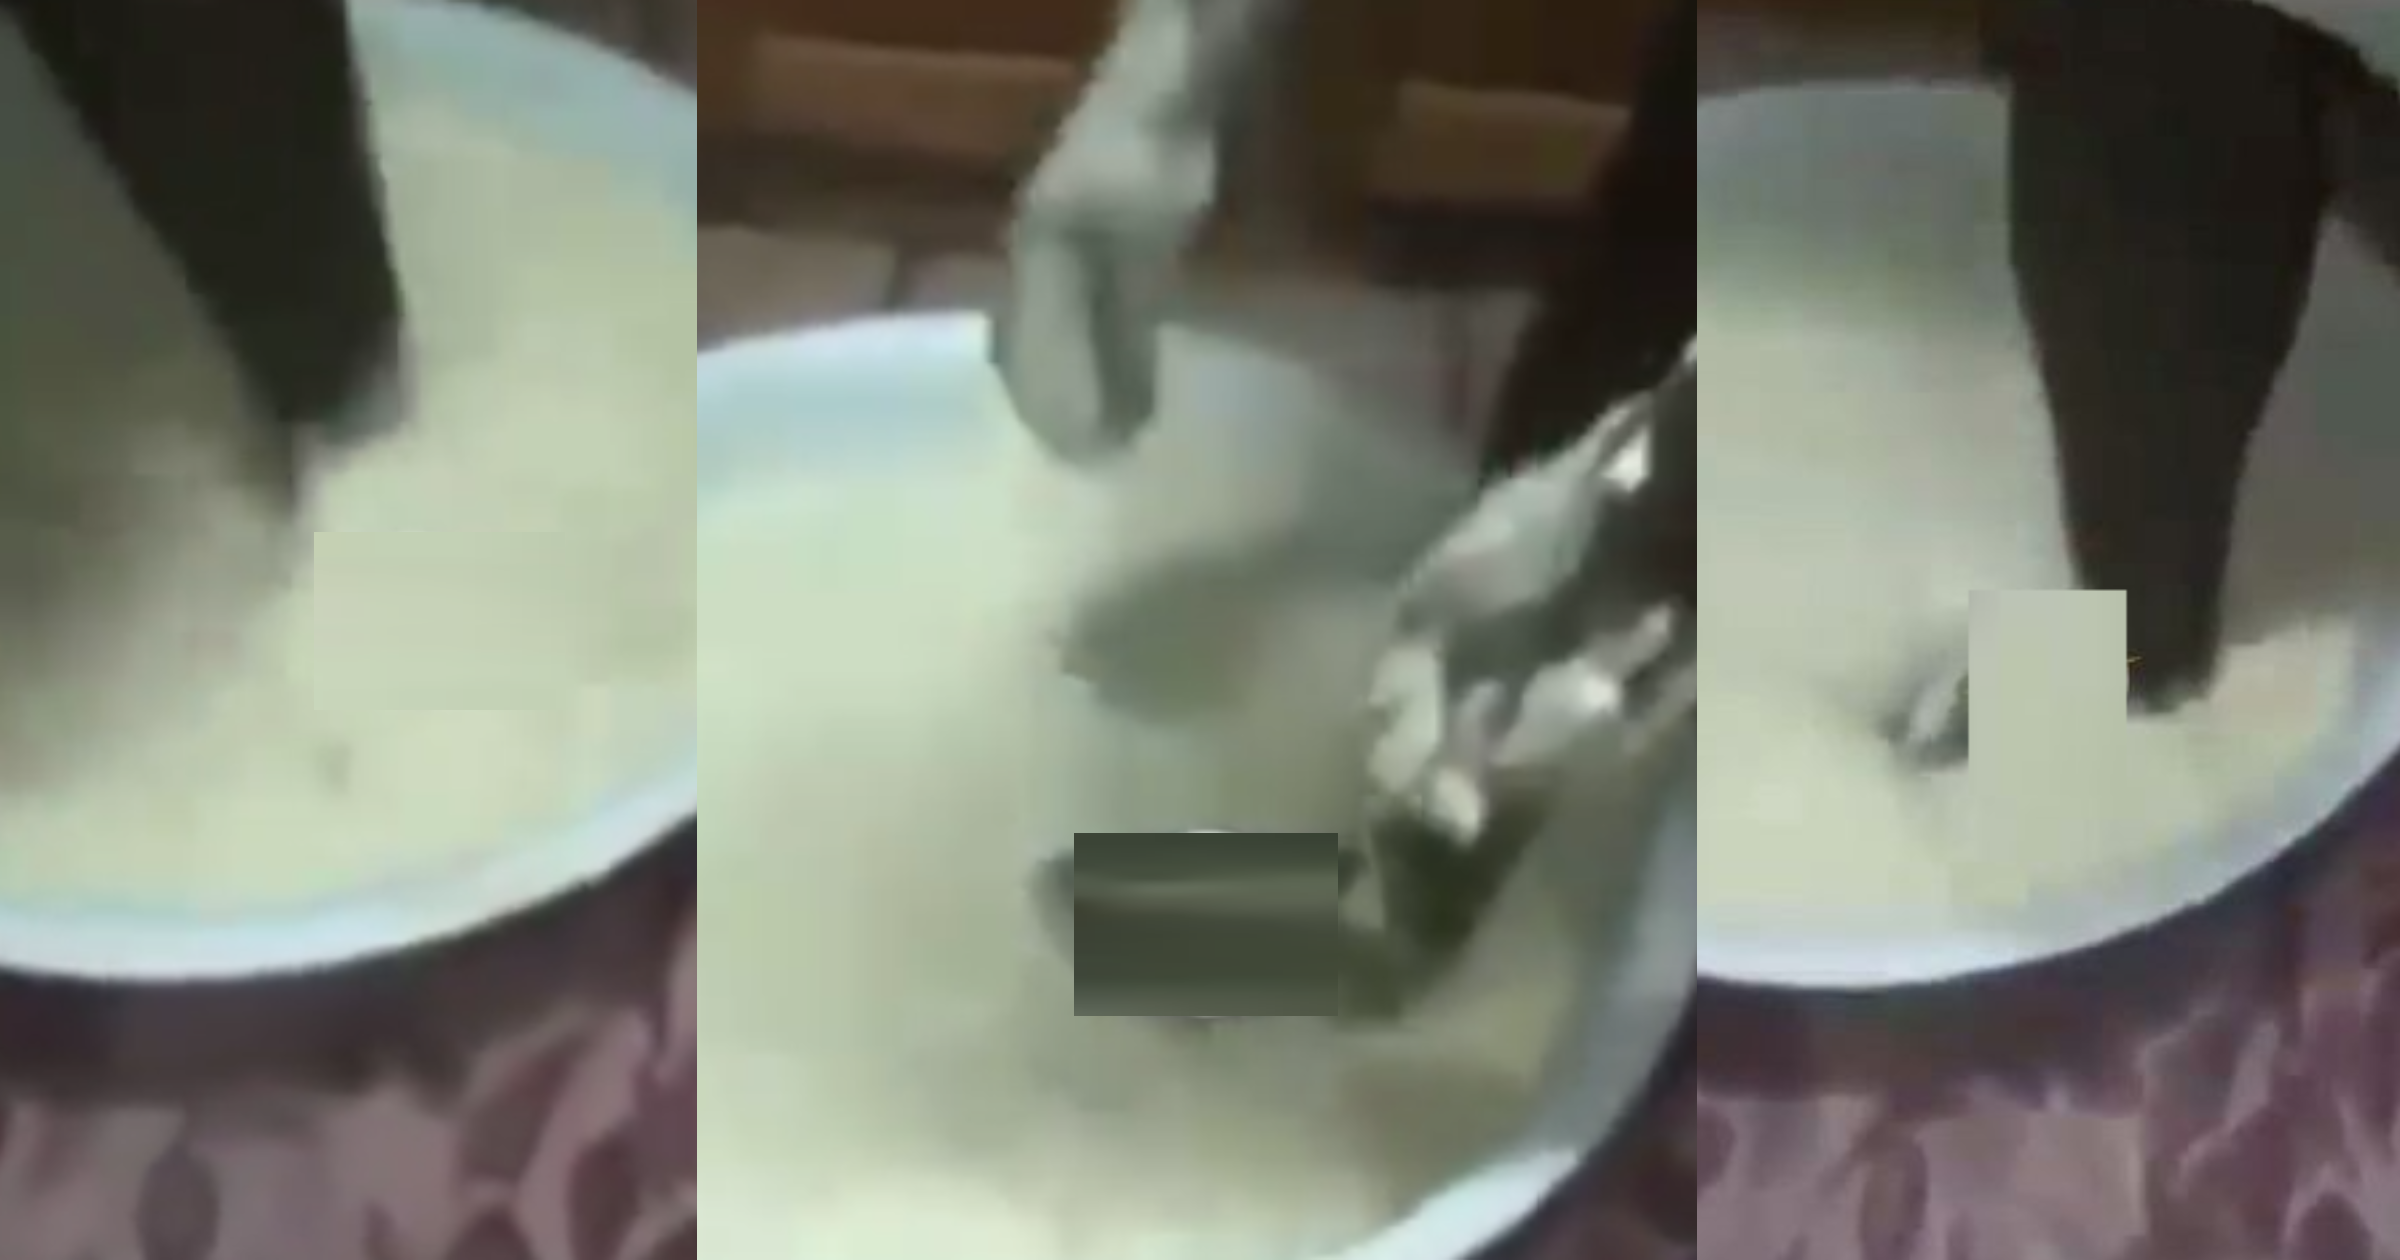 Bofrot seller captured on camera mashing flour with her dirty feet; internet reacts